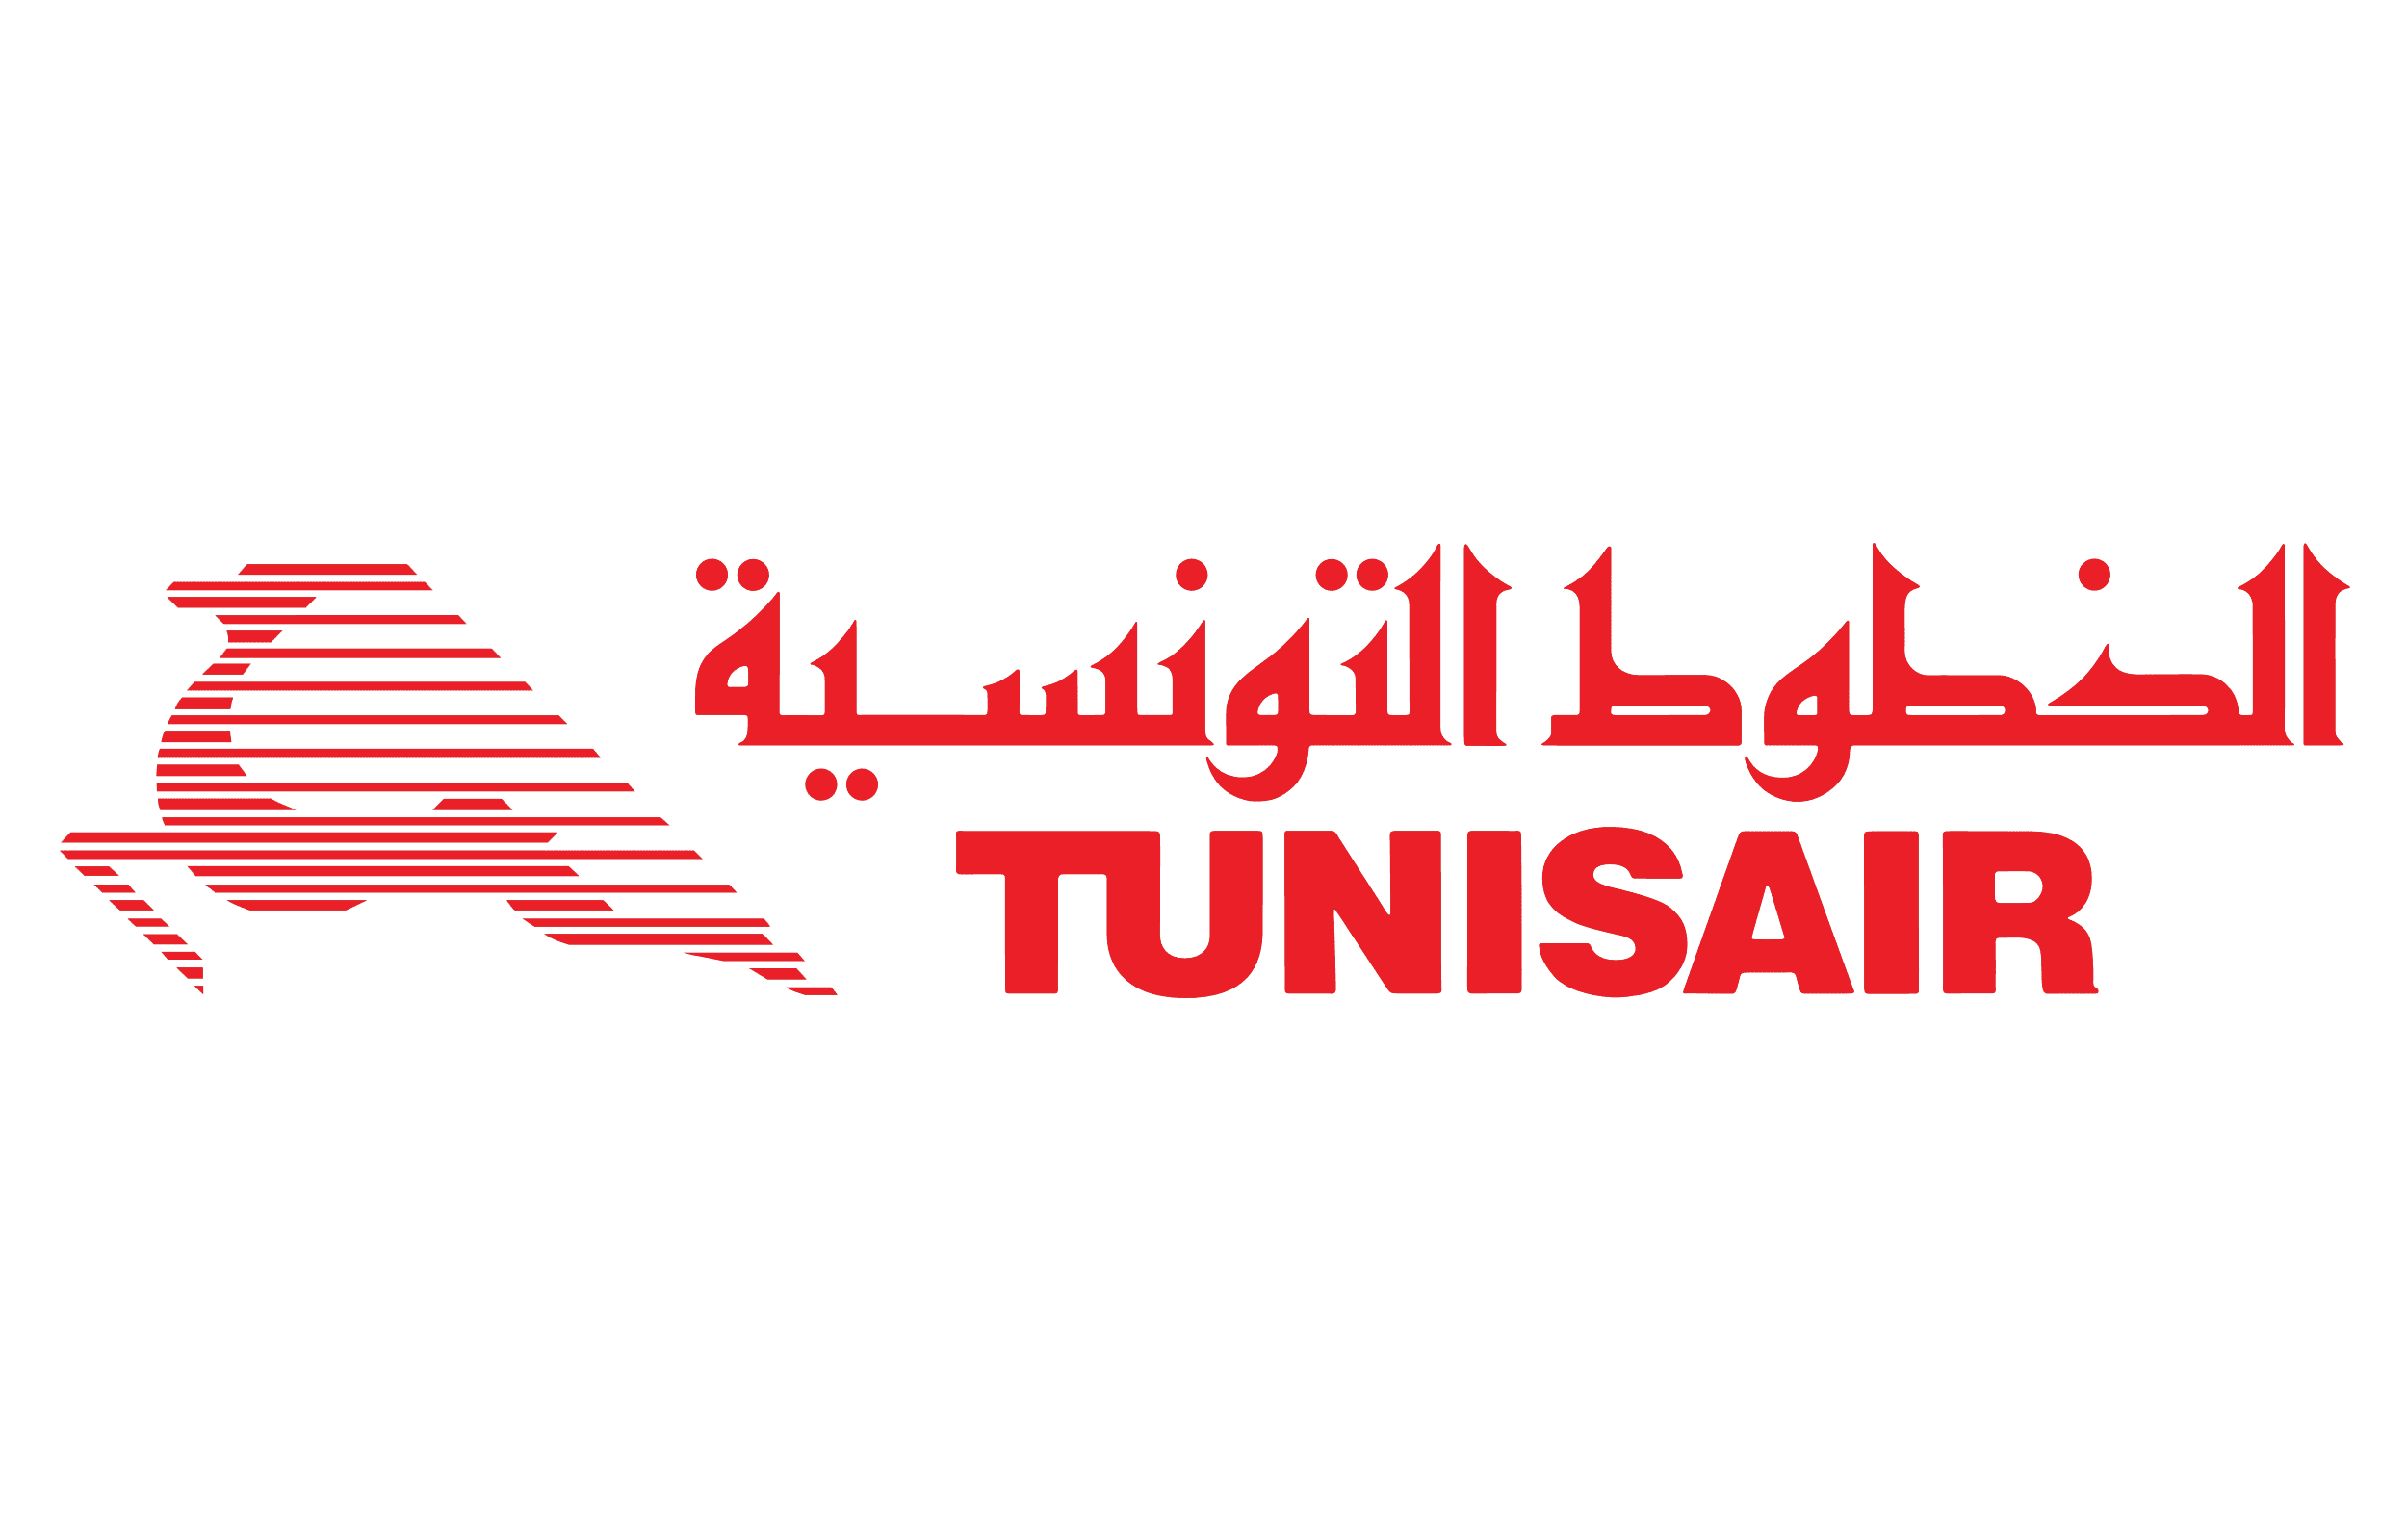 Tunisia to restructure debt-crippled national carrier